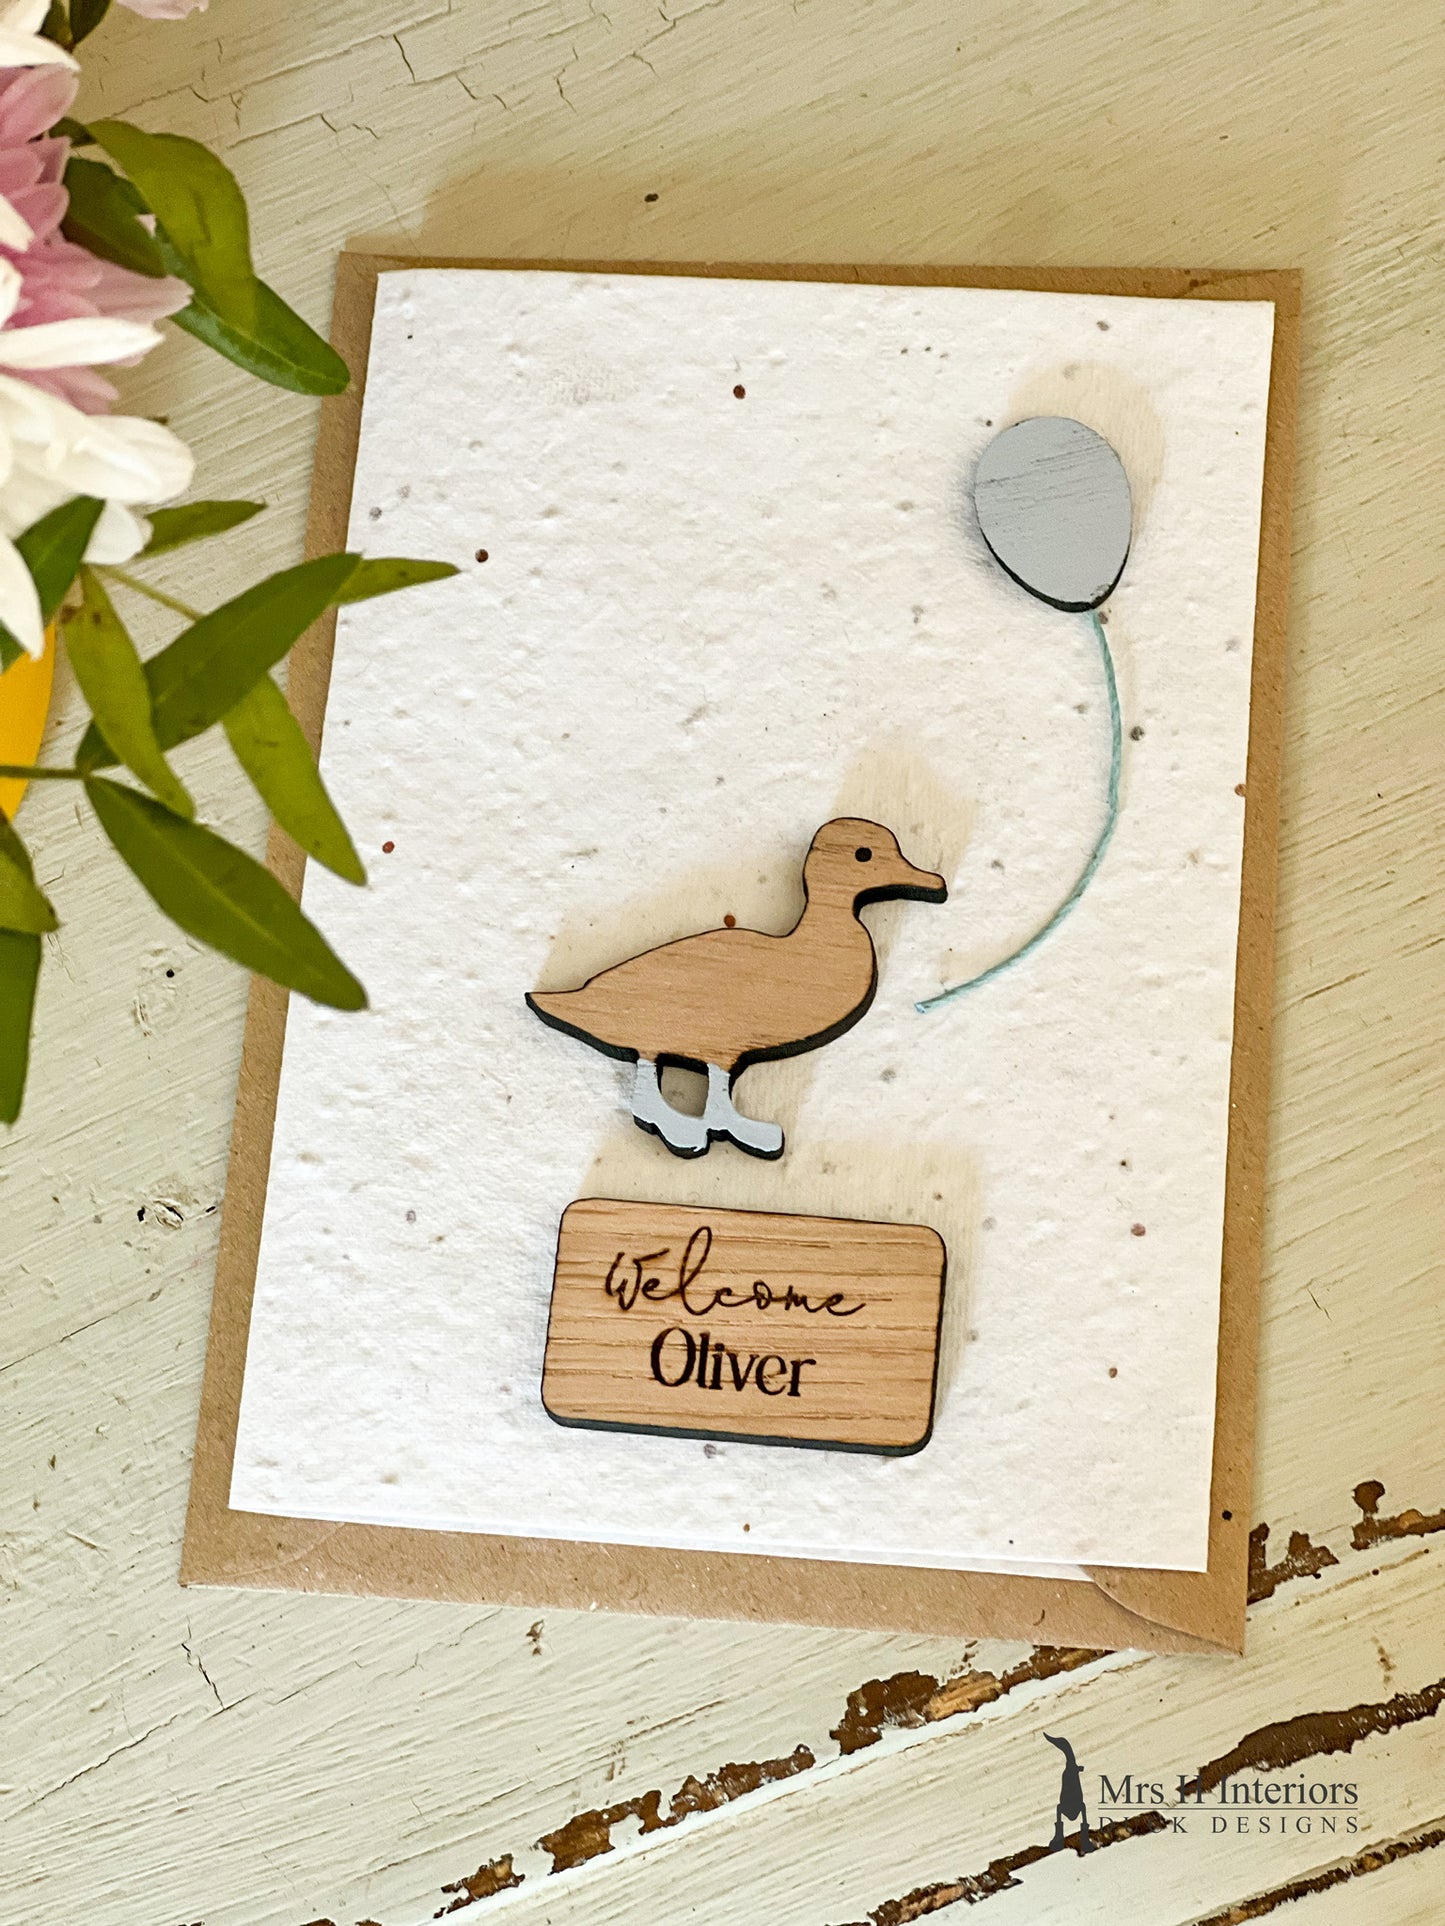 Welcome (personalised name) - Duckling & Balloon - Congratulations New Baby Card - Decorated Wooden Duck in Boots by Mrs H the Duck Lady